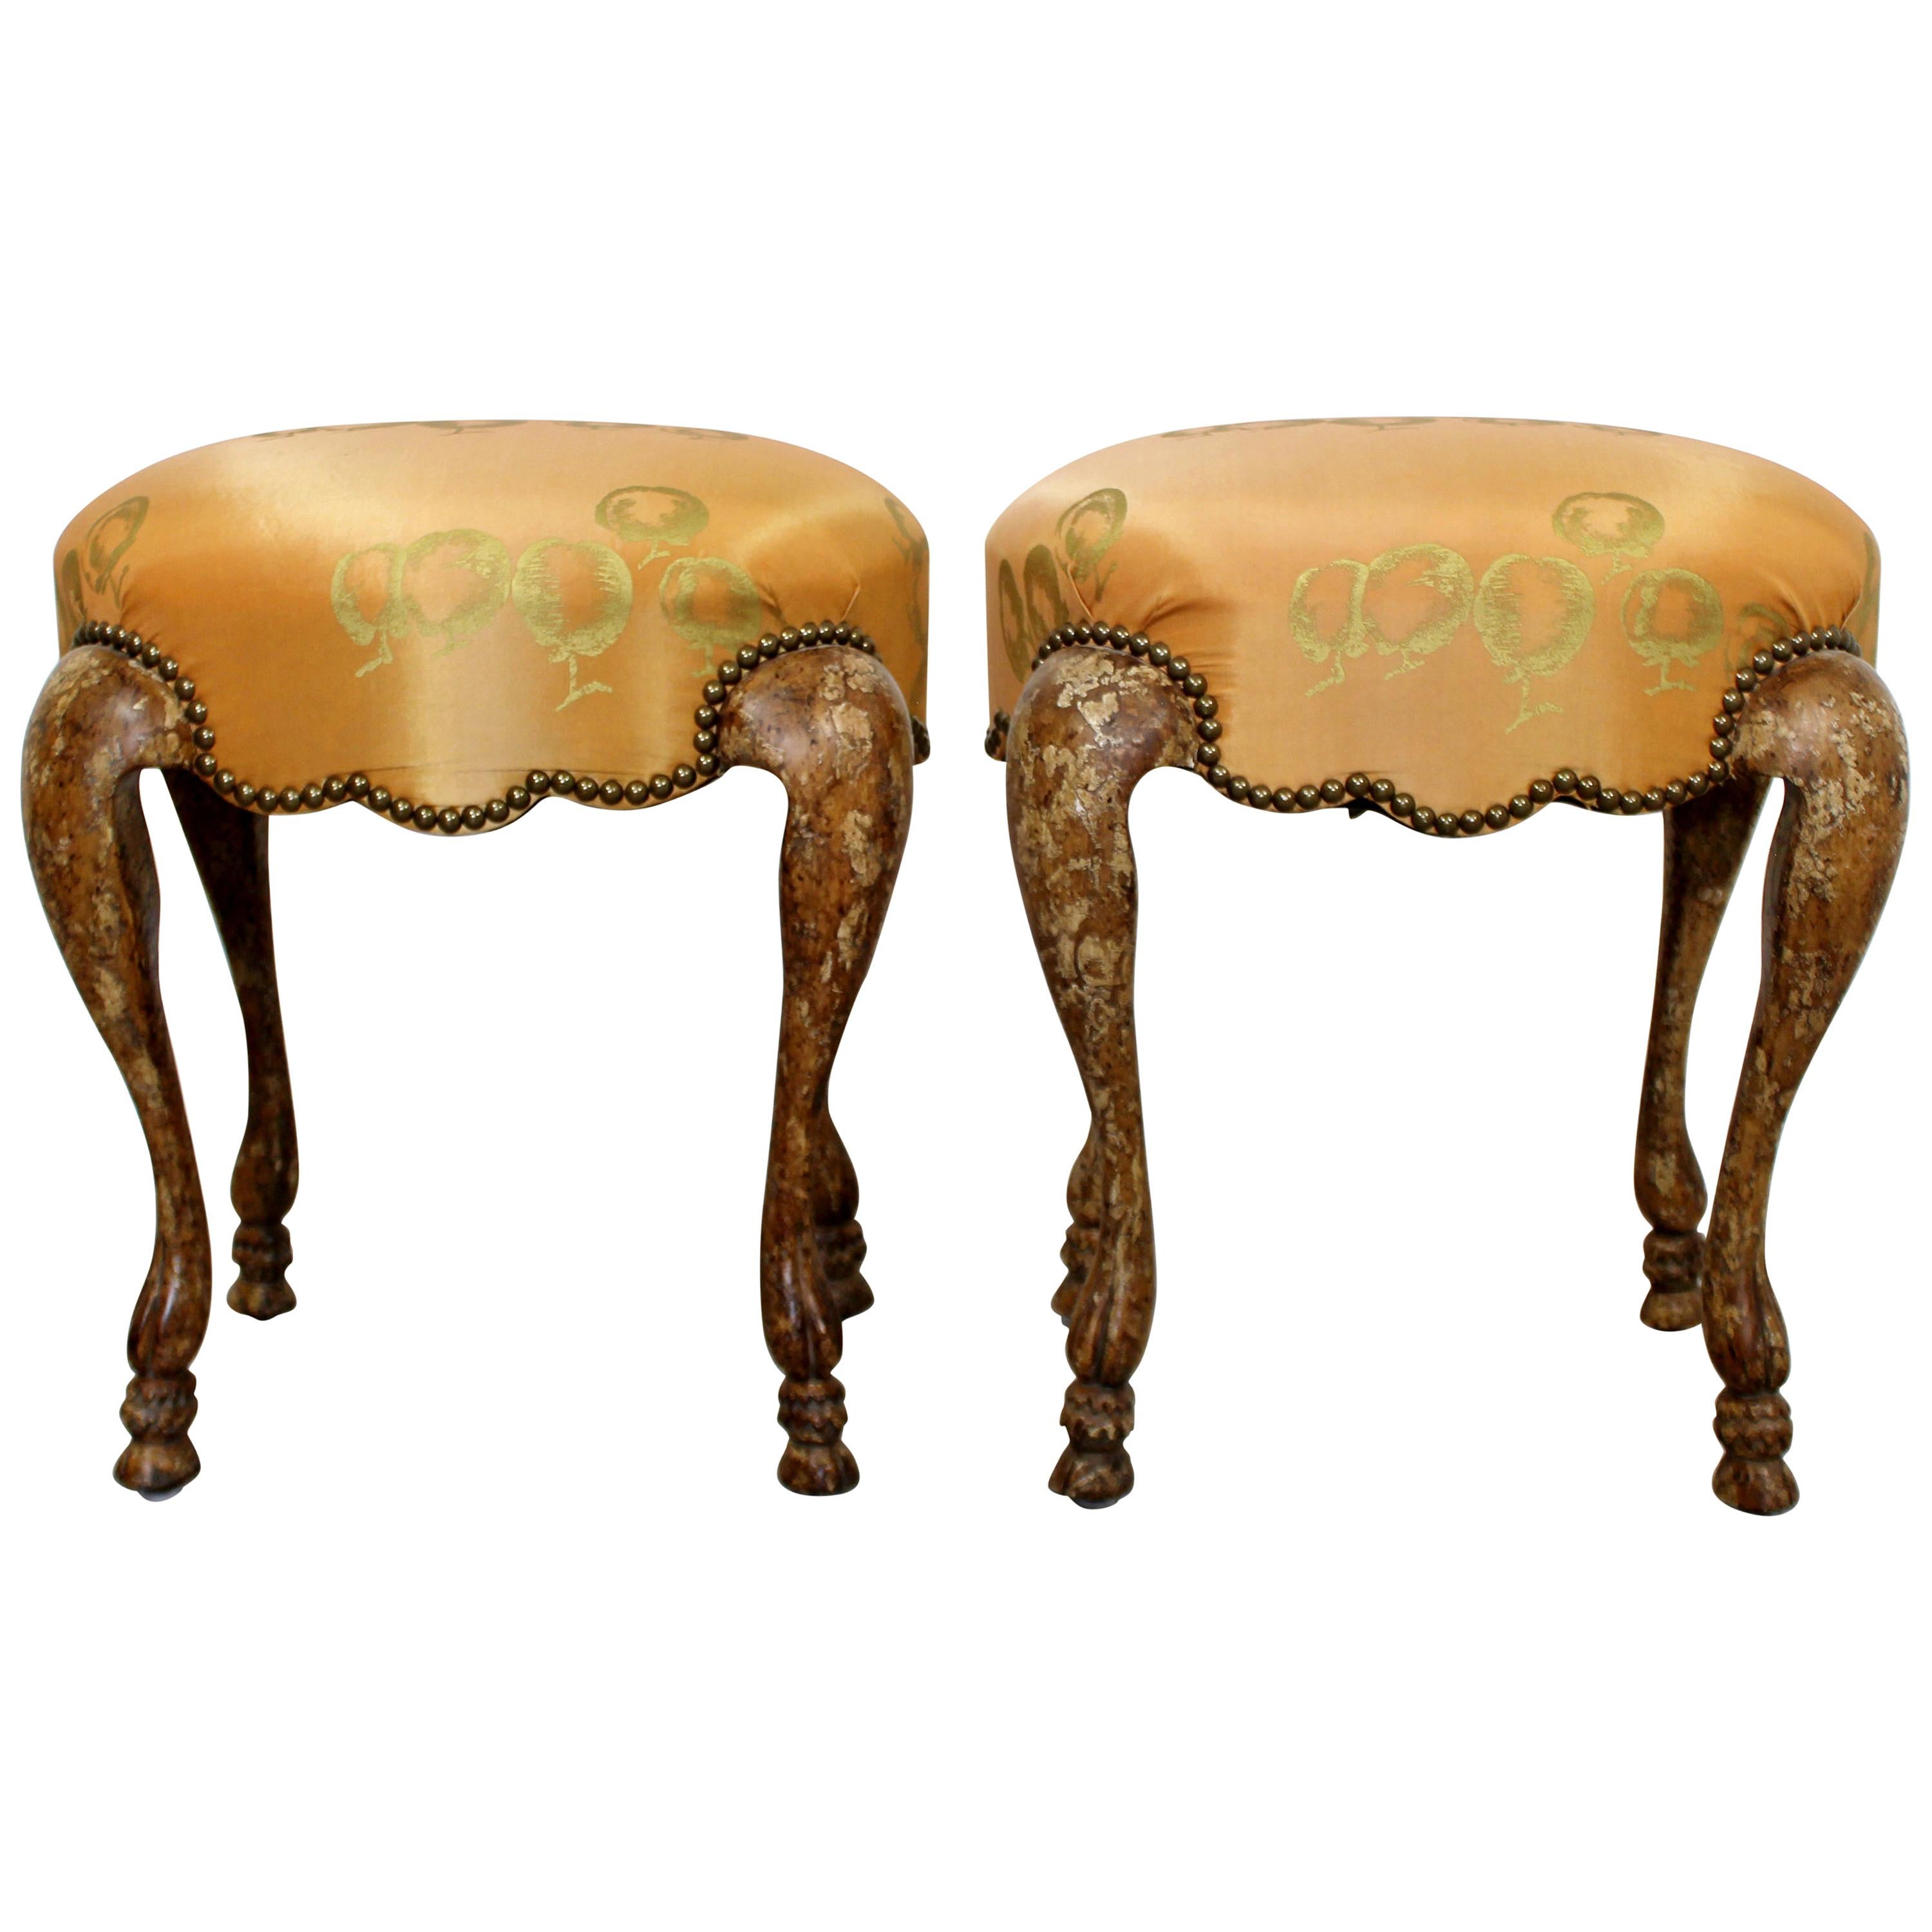 Art Deco Style Pair Carved Wood Upholstered Stools Cabriole Legs Minton-Spidell